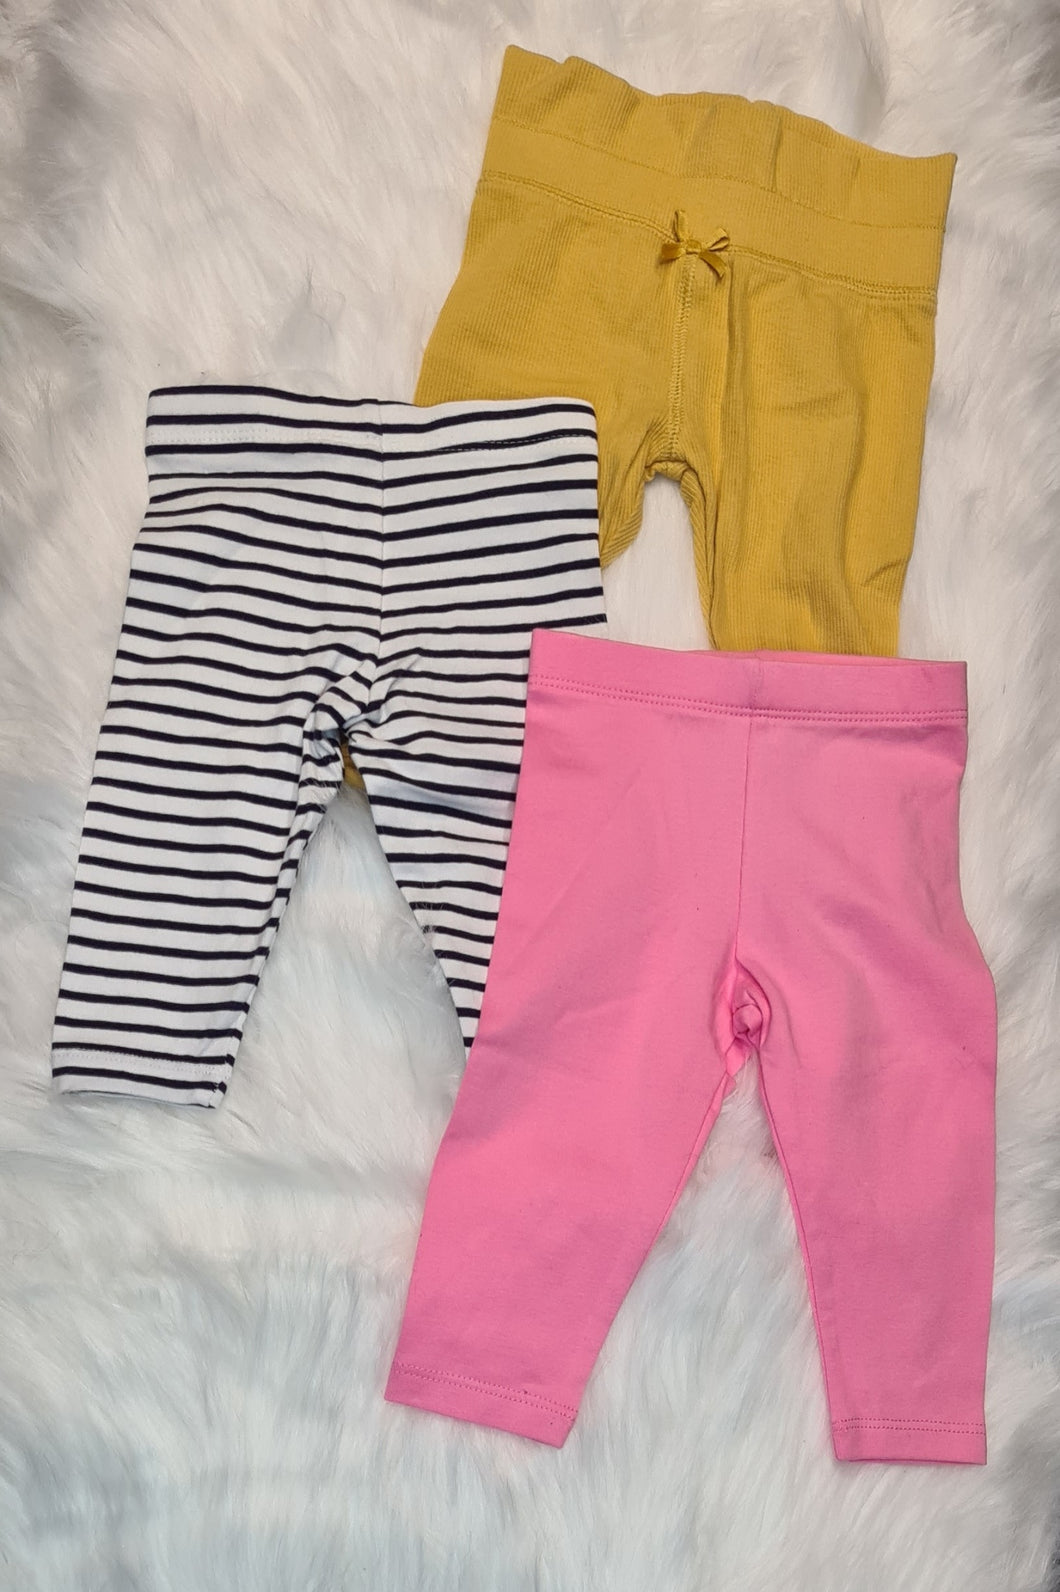 Girls 3-6 Months - Set of 3 Striped and Coloured Leggings